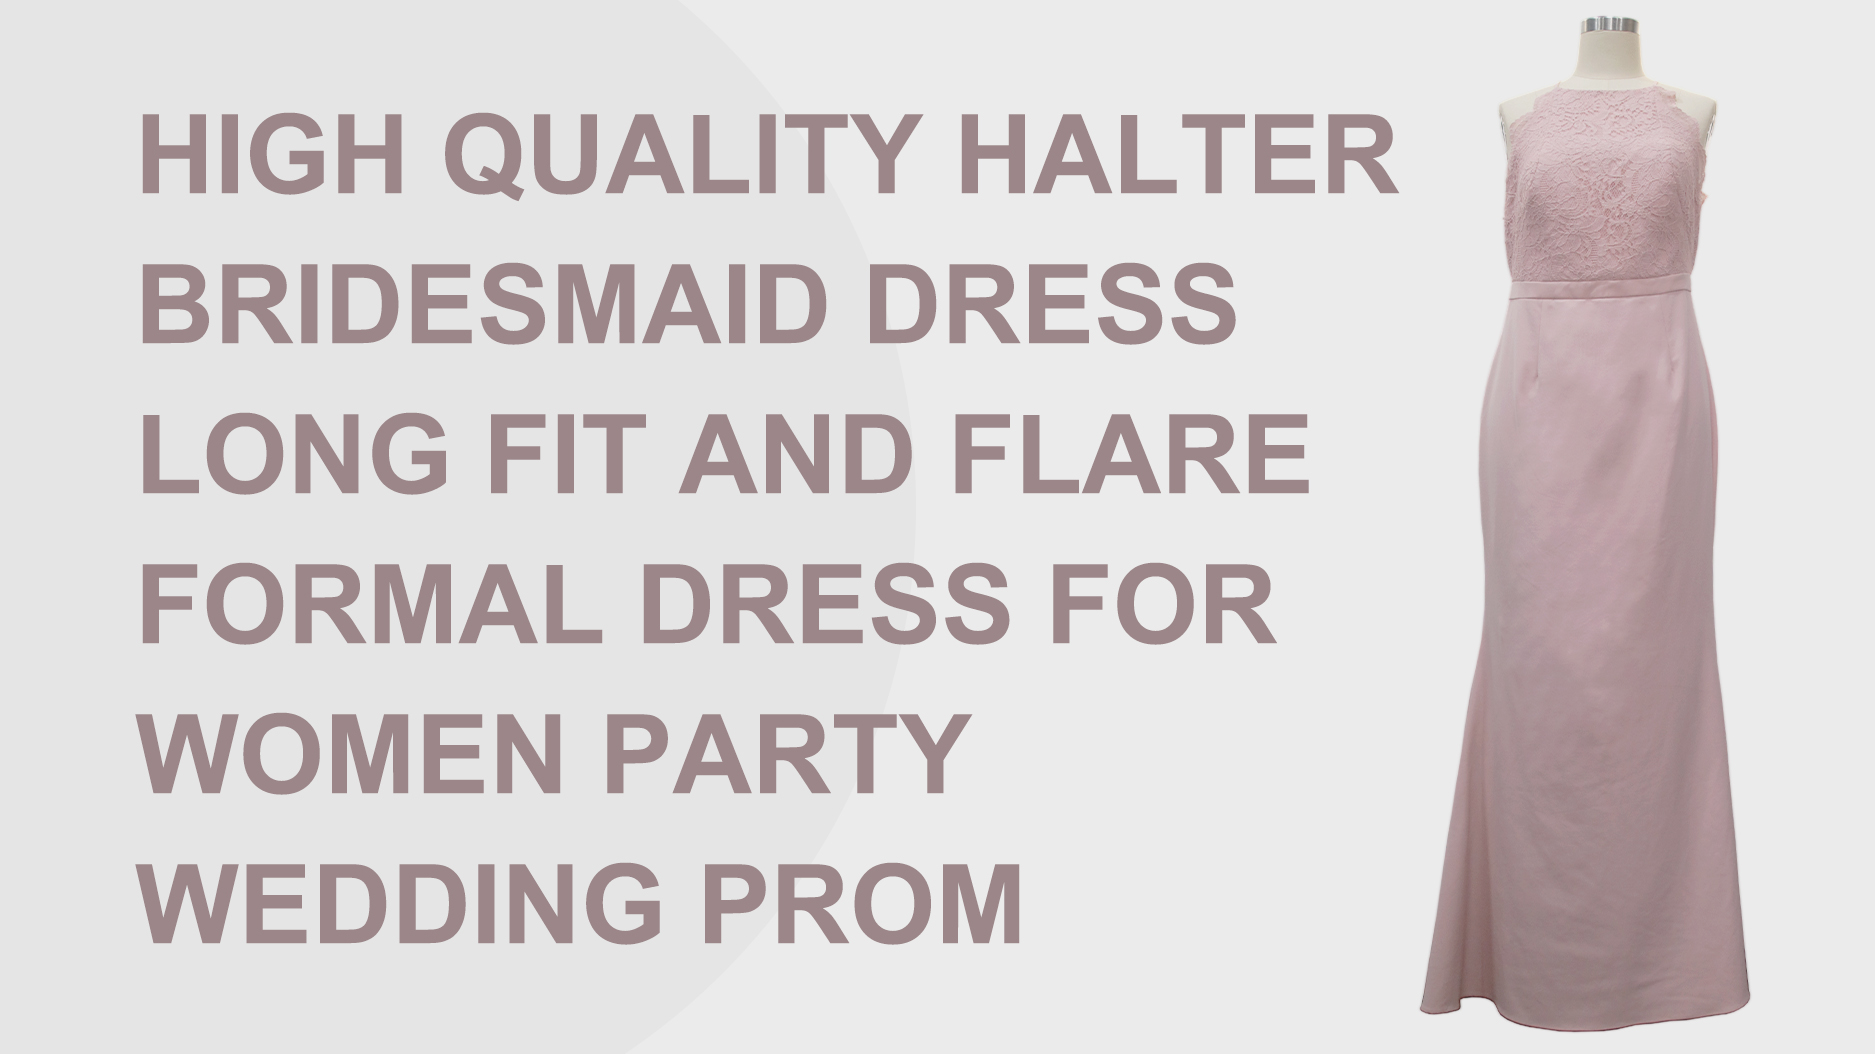 Quality Halter Bridesmaid Dress Long Fit and Flare Formal Women Party Wedding Prom Manufacturer |Auschalink